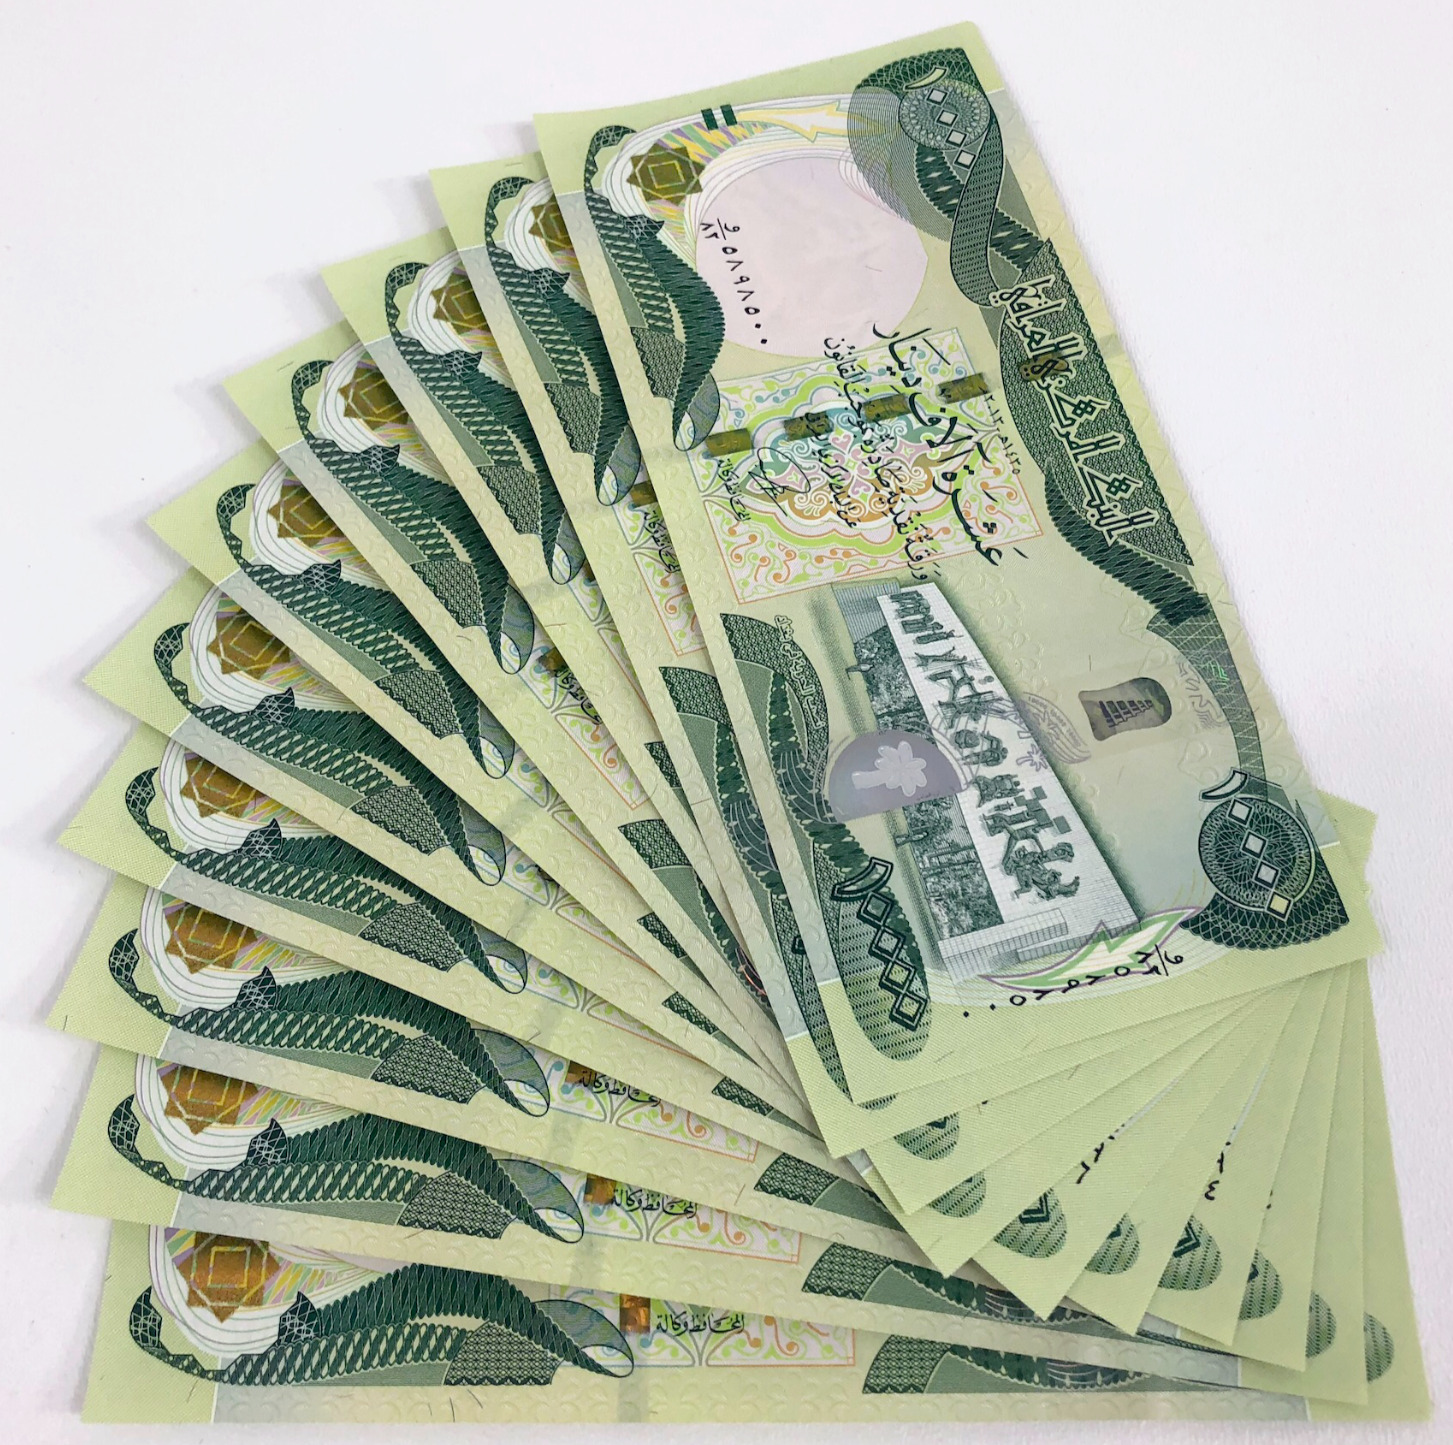 *NEW* 100,000 IRAQI DINAR (10) 10,000 UNCIRCULATED IQD W/ NEW SECURITY FEATURES